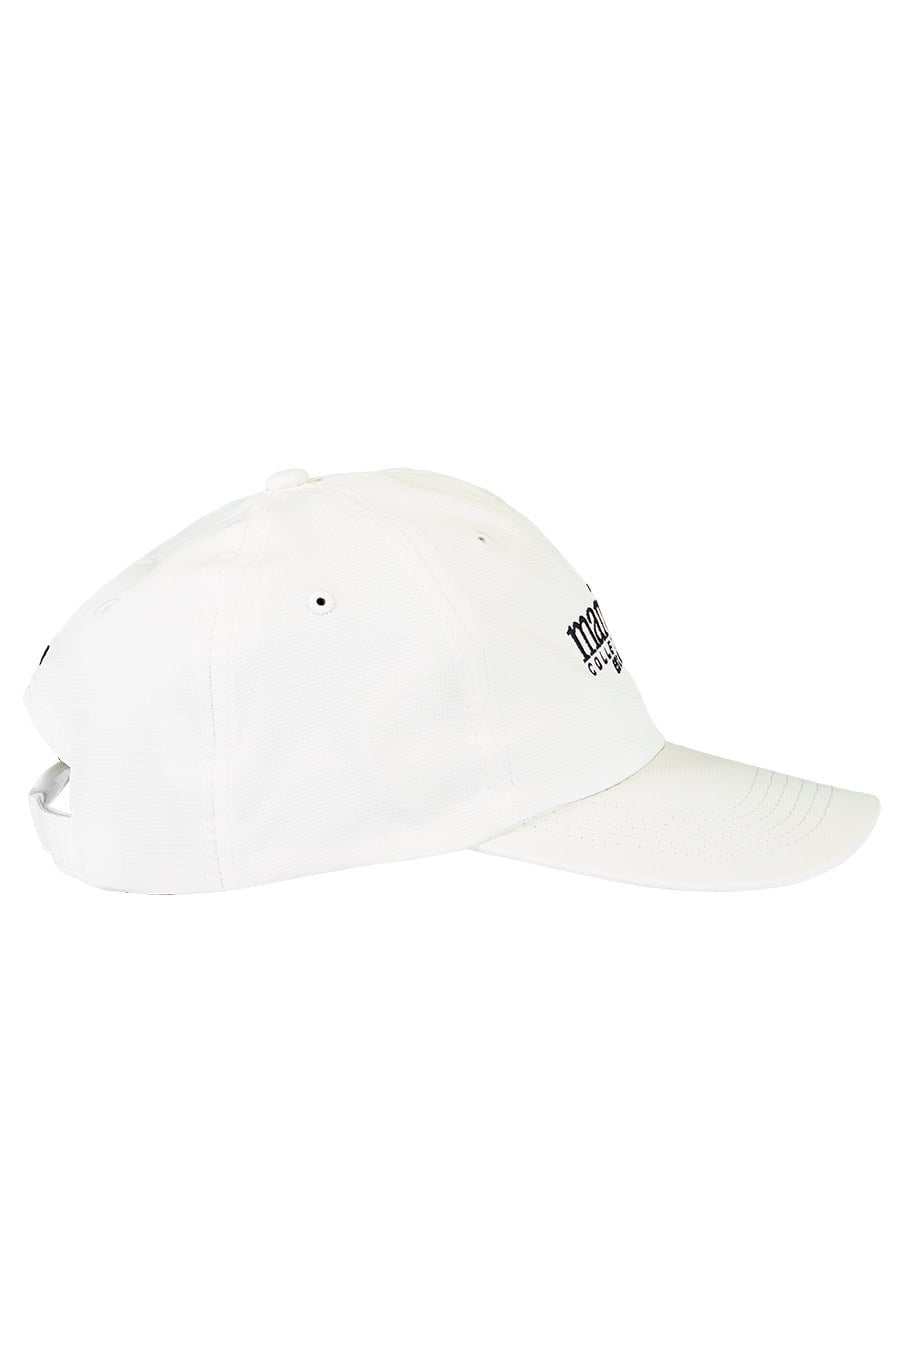 MARISSA COLLECTIONS-White Hat-WHITE